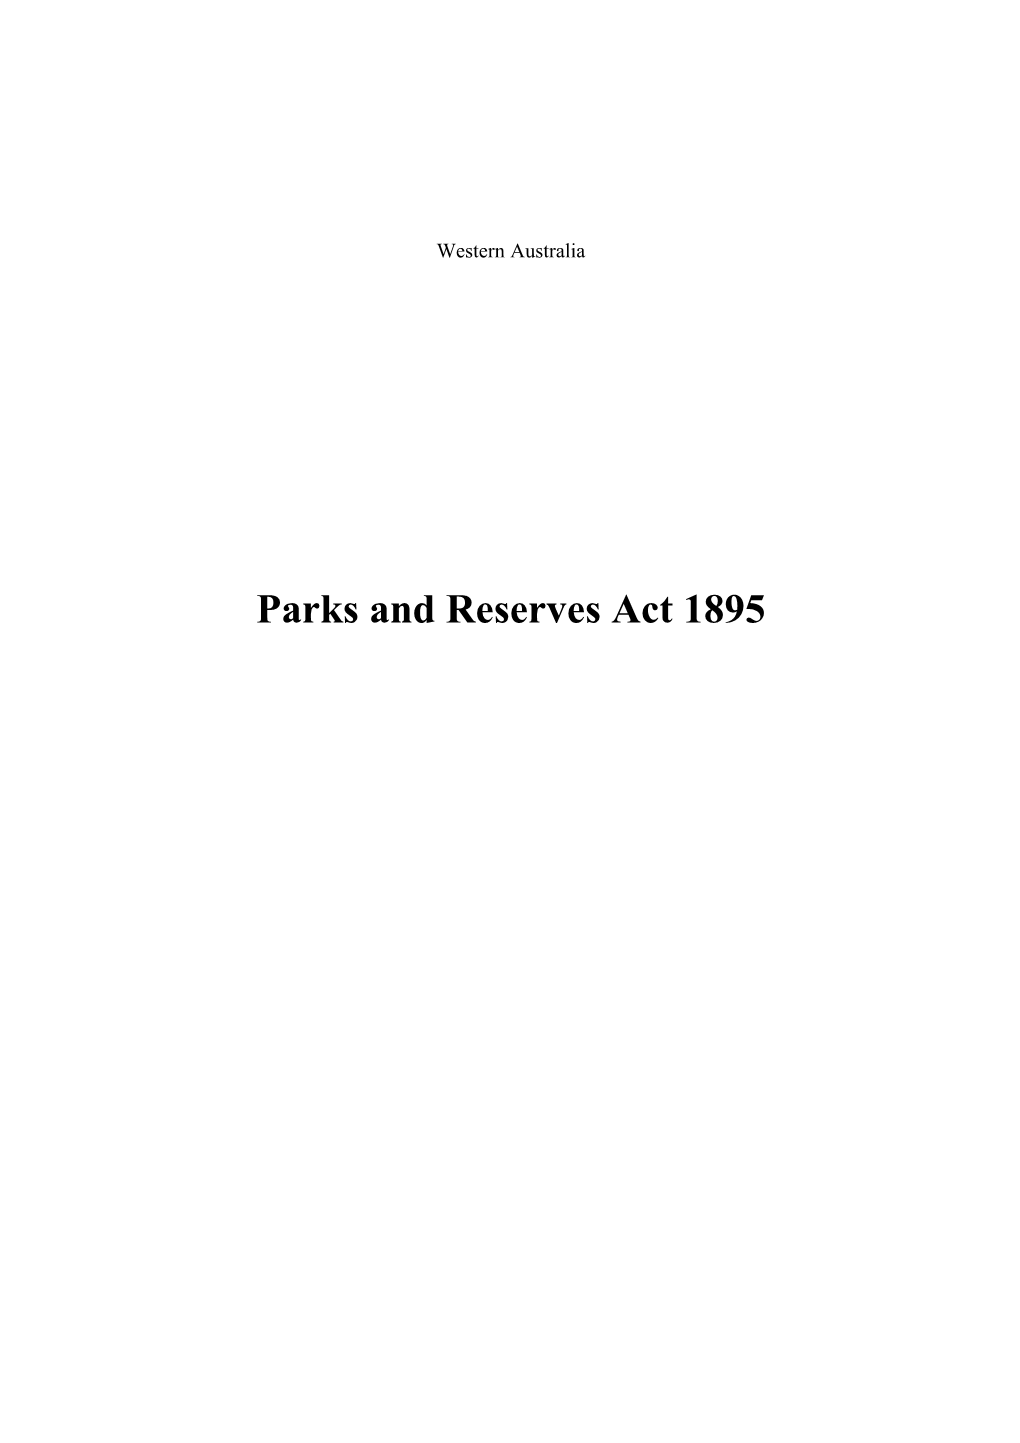 Parks and Reserves Act 1895 - 05-A0-00